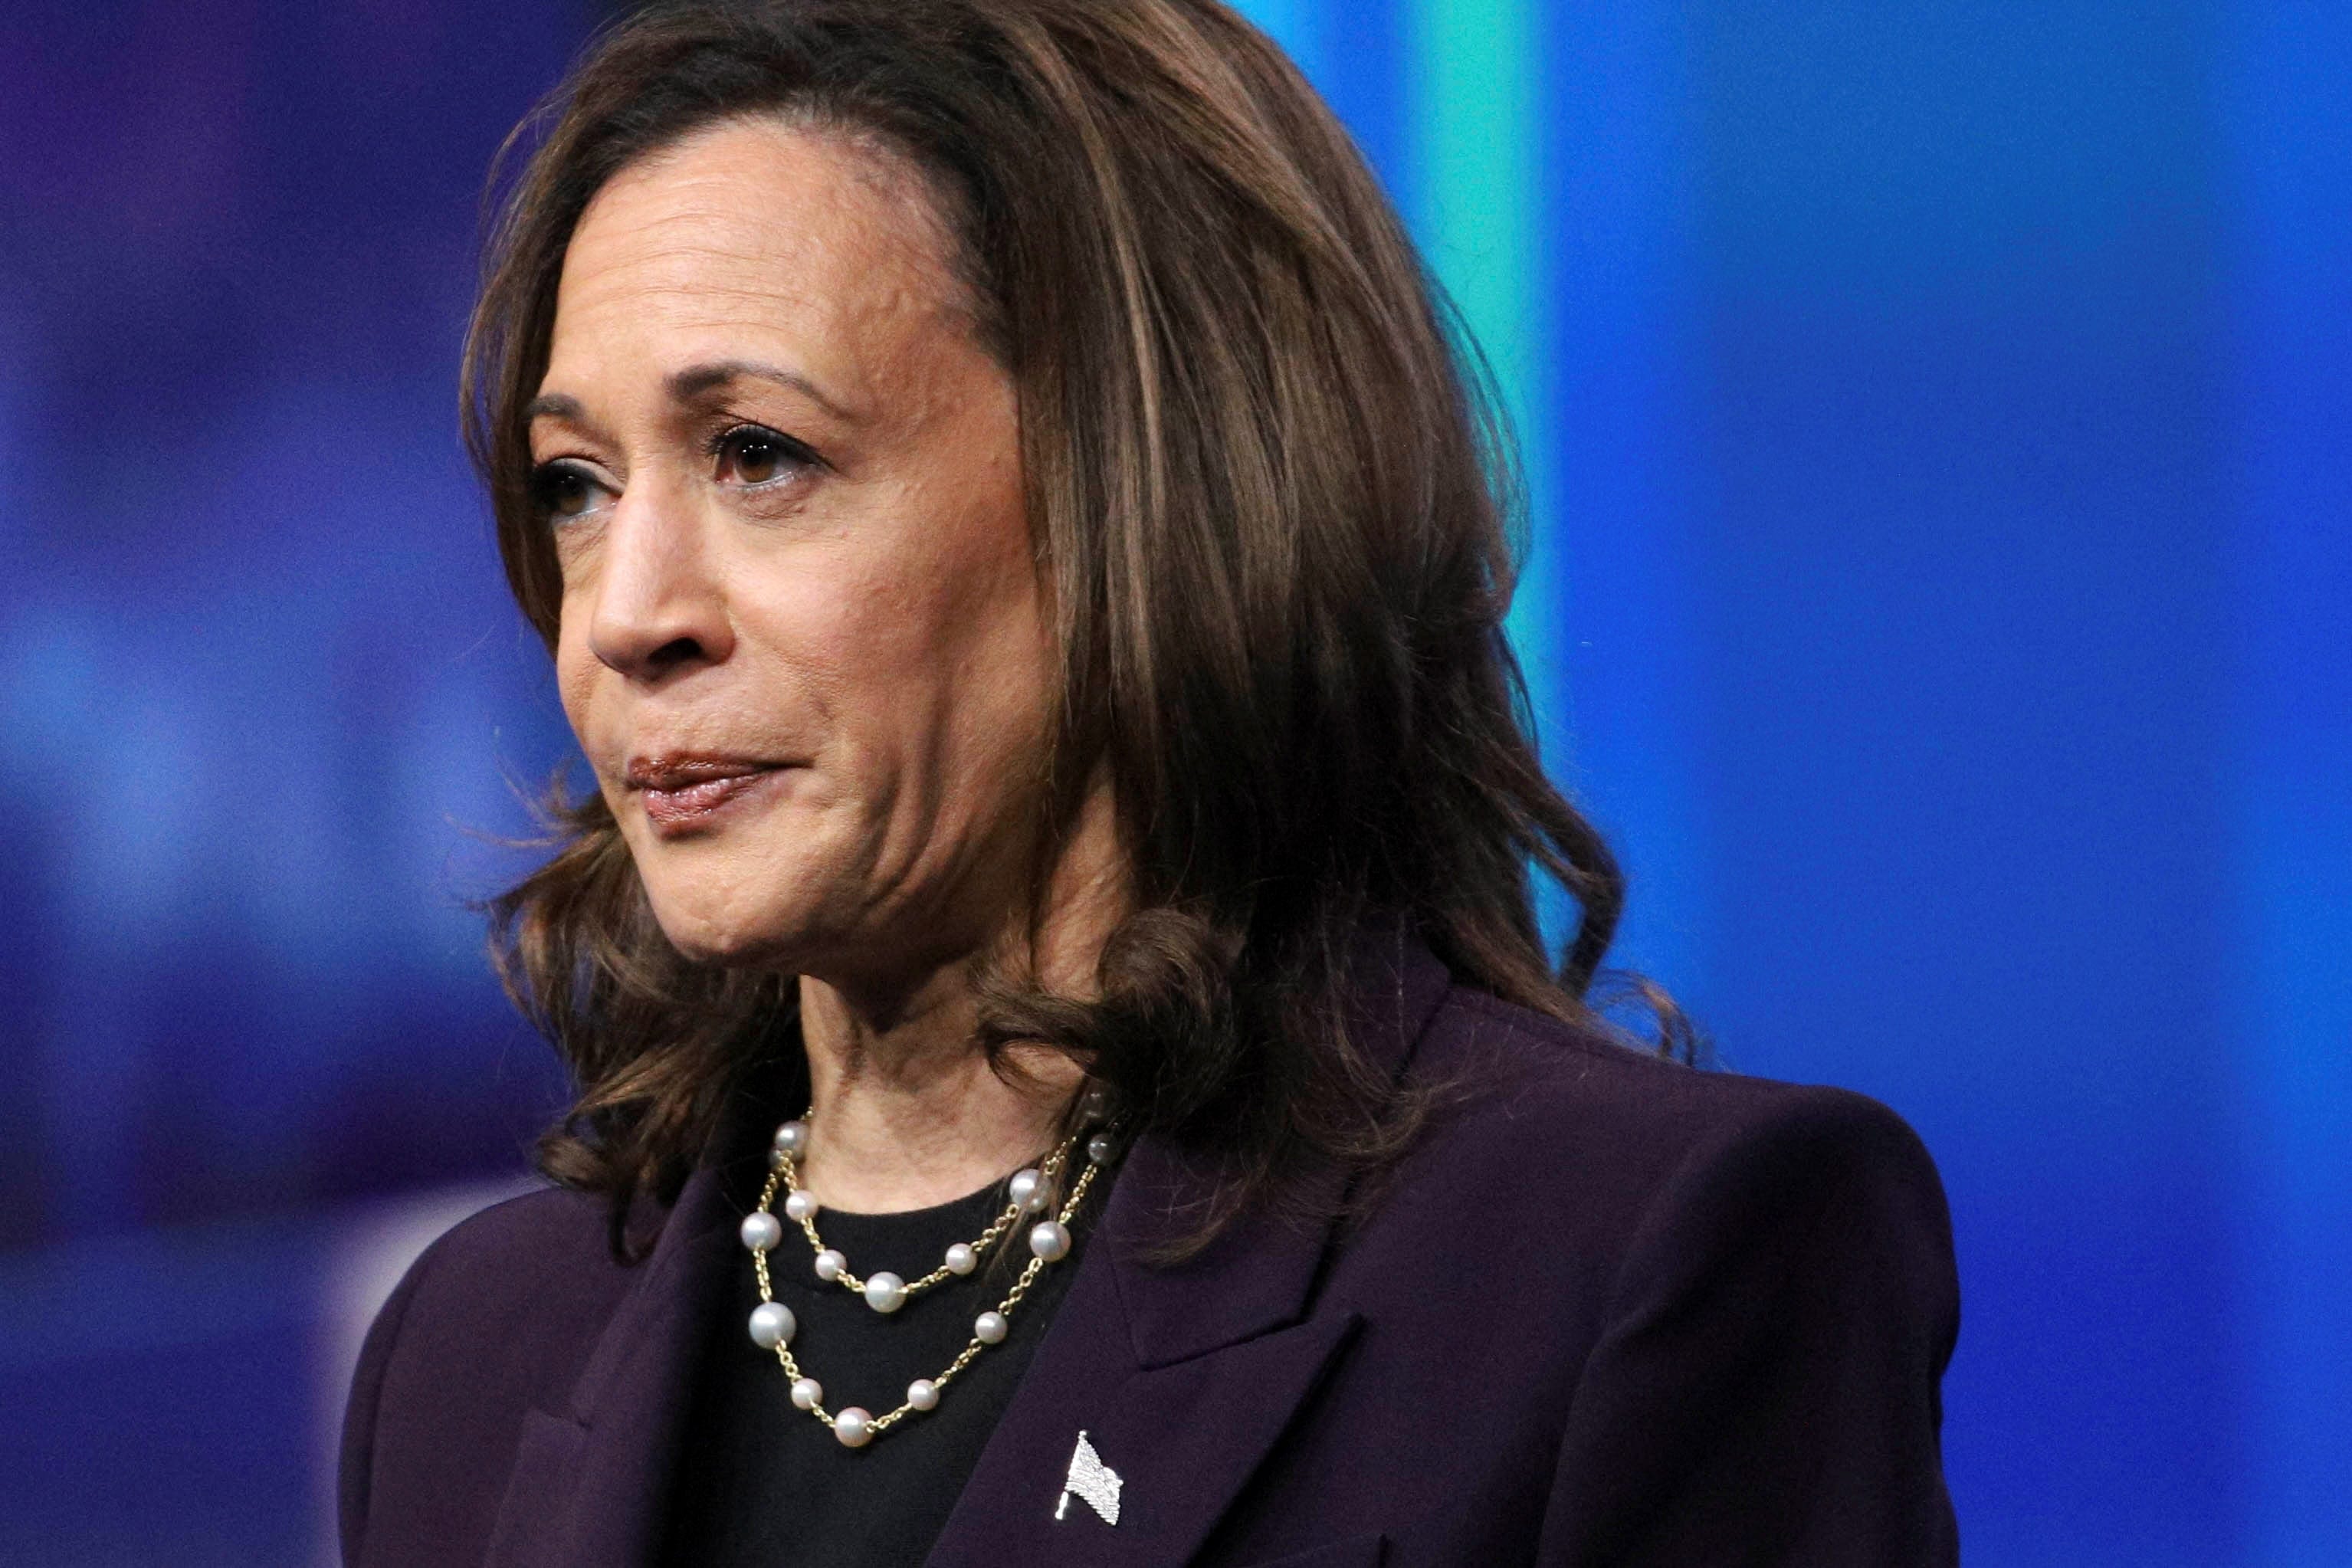 Kamala Harris is again facing attacks on her racial identity. Here’s more about her background.